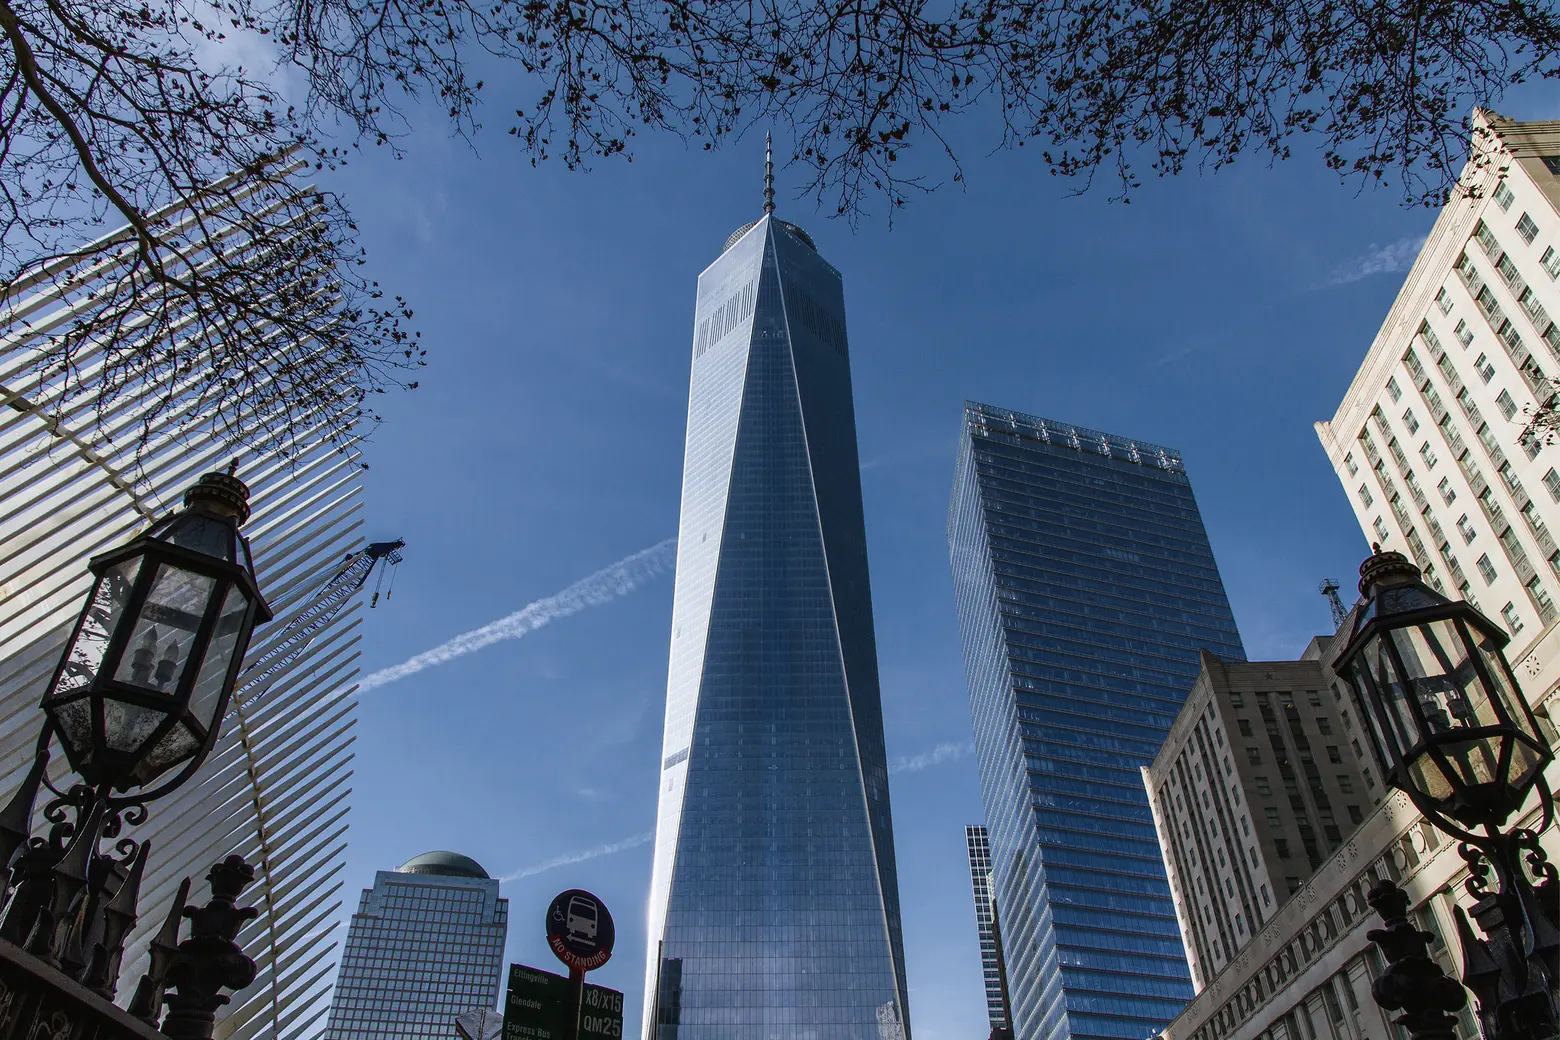 Cuomo releases RFP for 5 World Trade Center, may include 900-foot tower and affordable housing